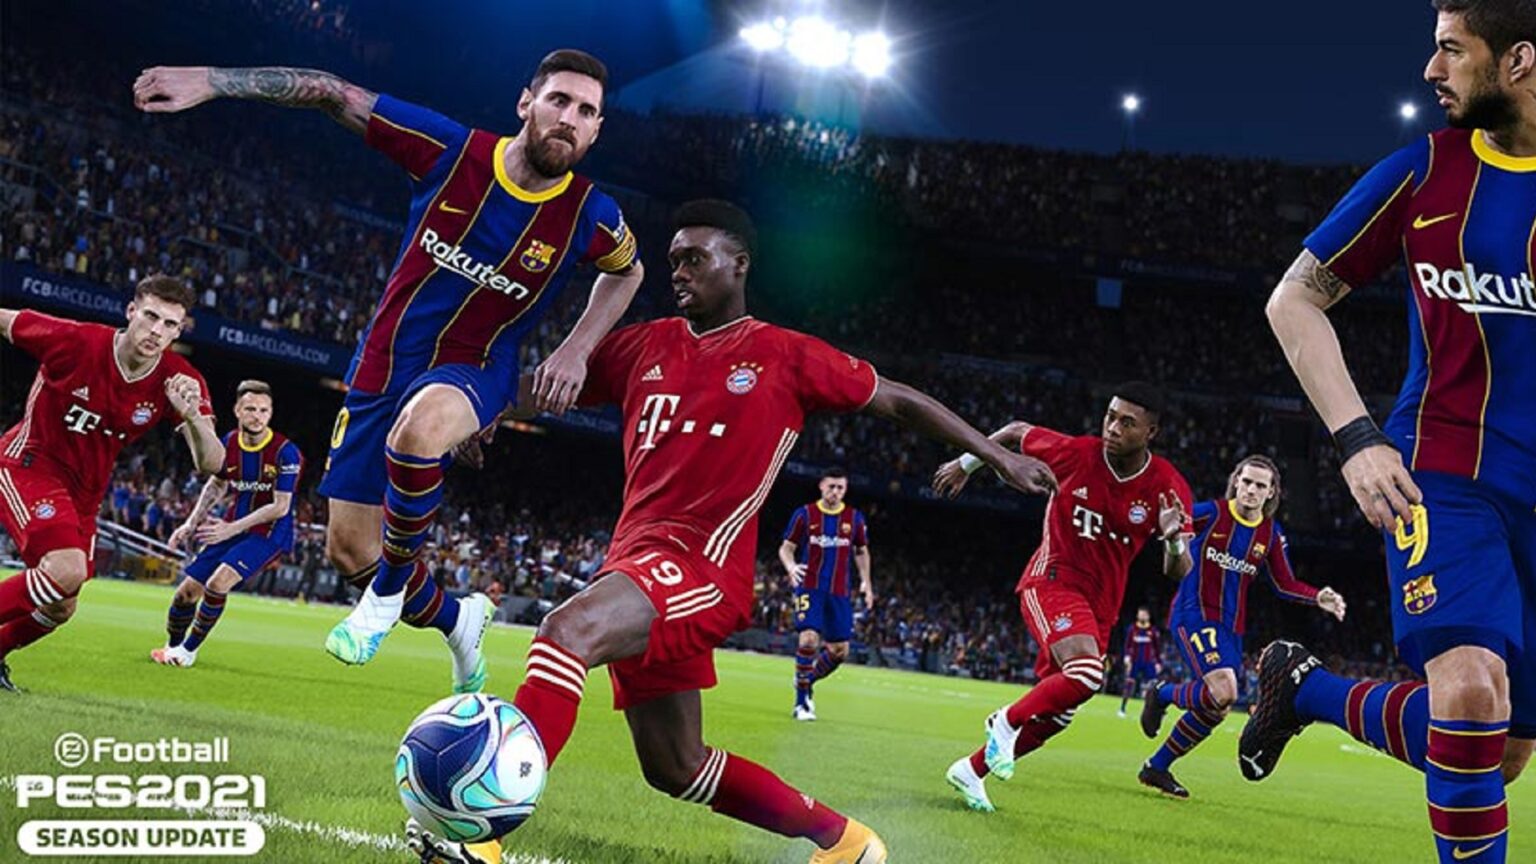 Verlichting Doe voorzichtig Berekening PES 21 Lite Is Now Available on PS4, Xbox One and PC| Gaming Instincts